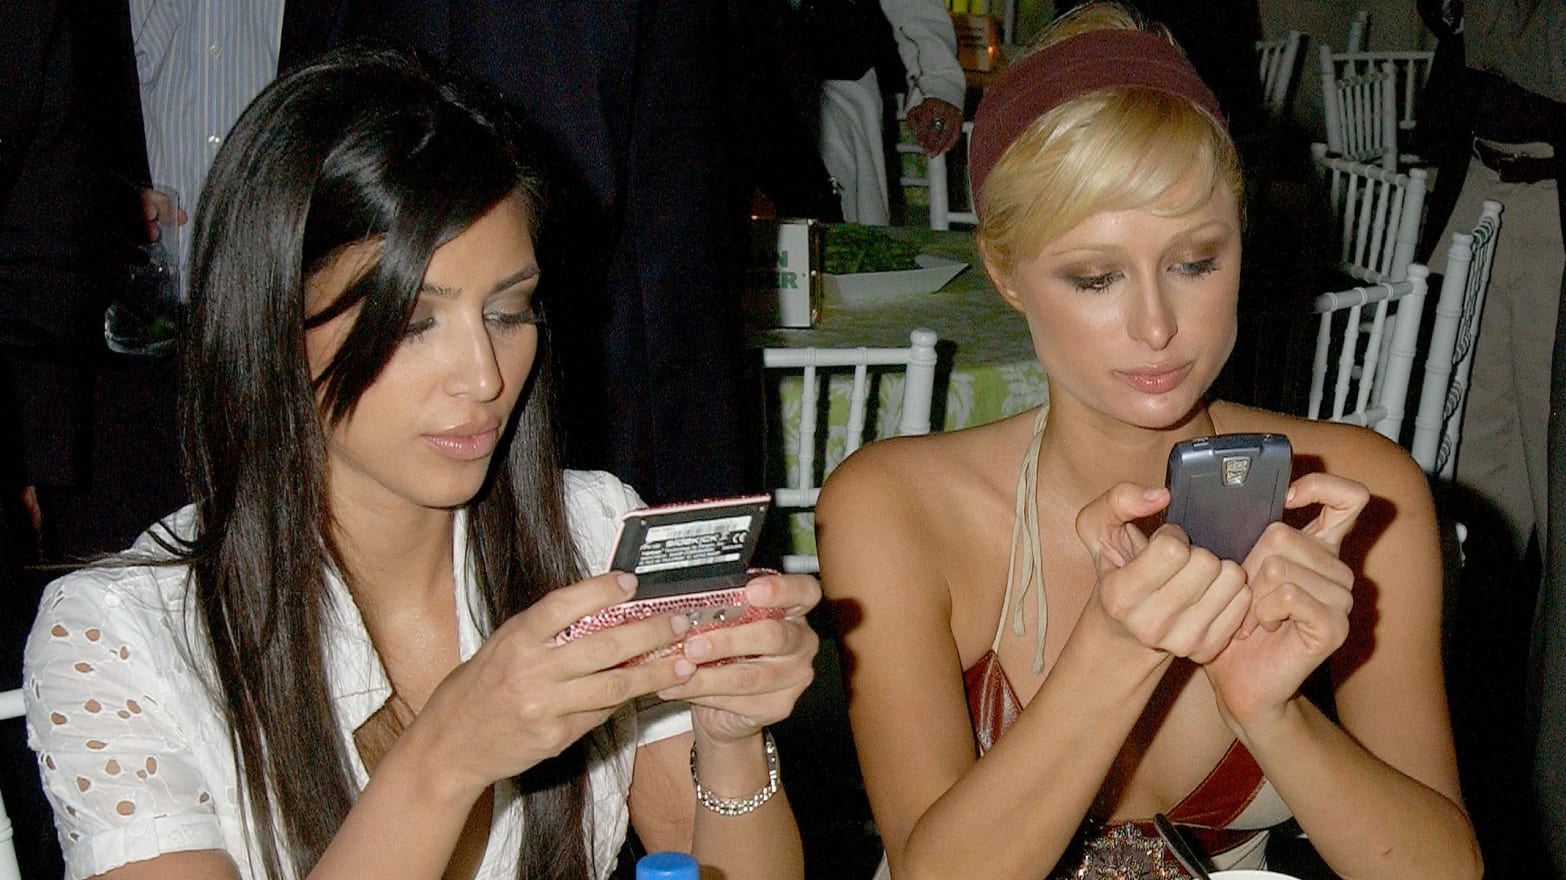 Paris Hilton's style 'matured' over time whereas Kim Kardashian is still a  'spectacle who wants attention', says expert